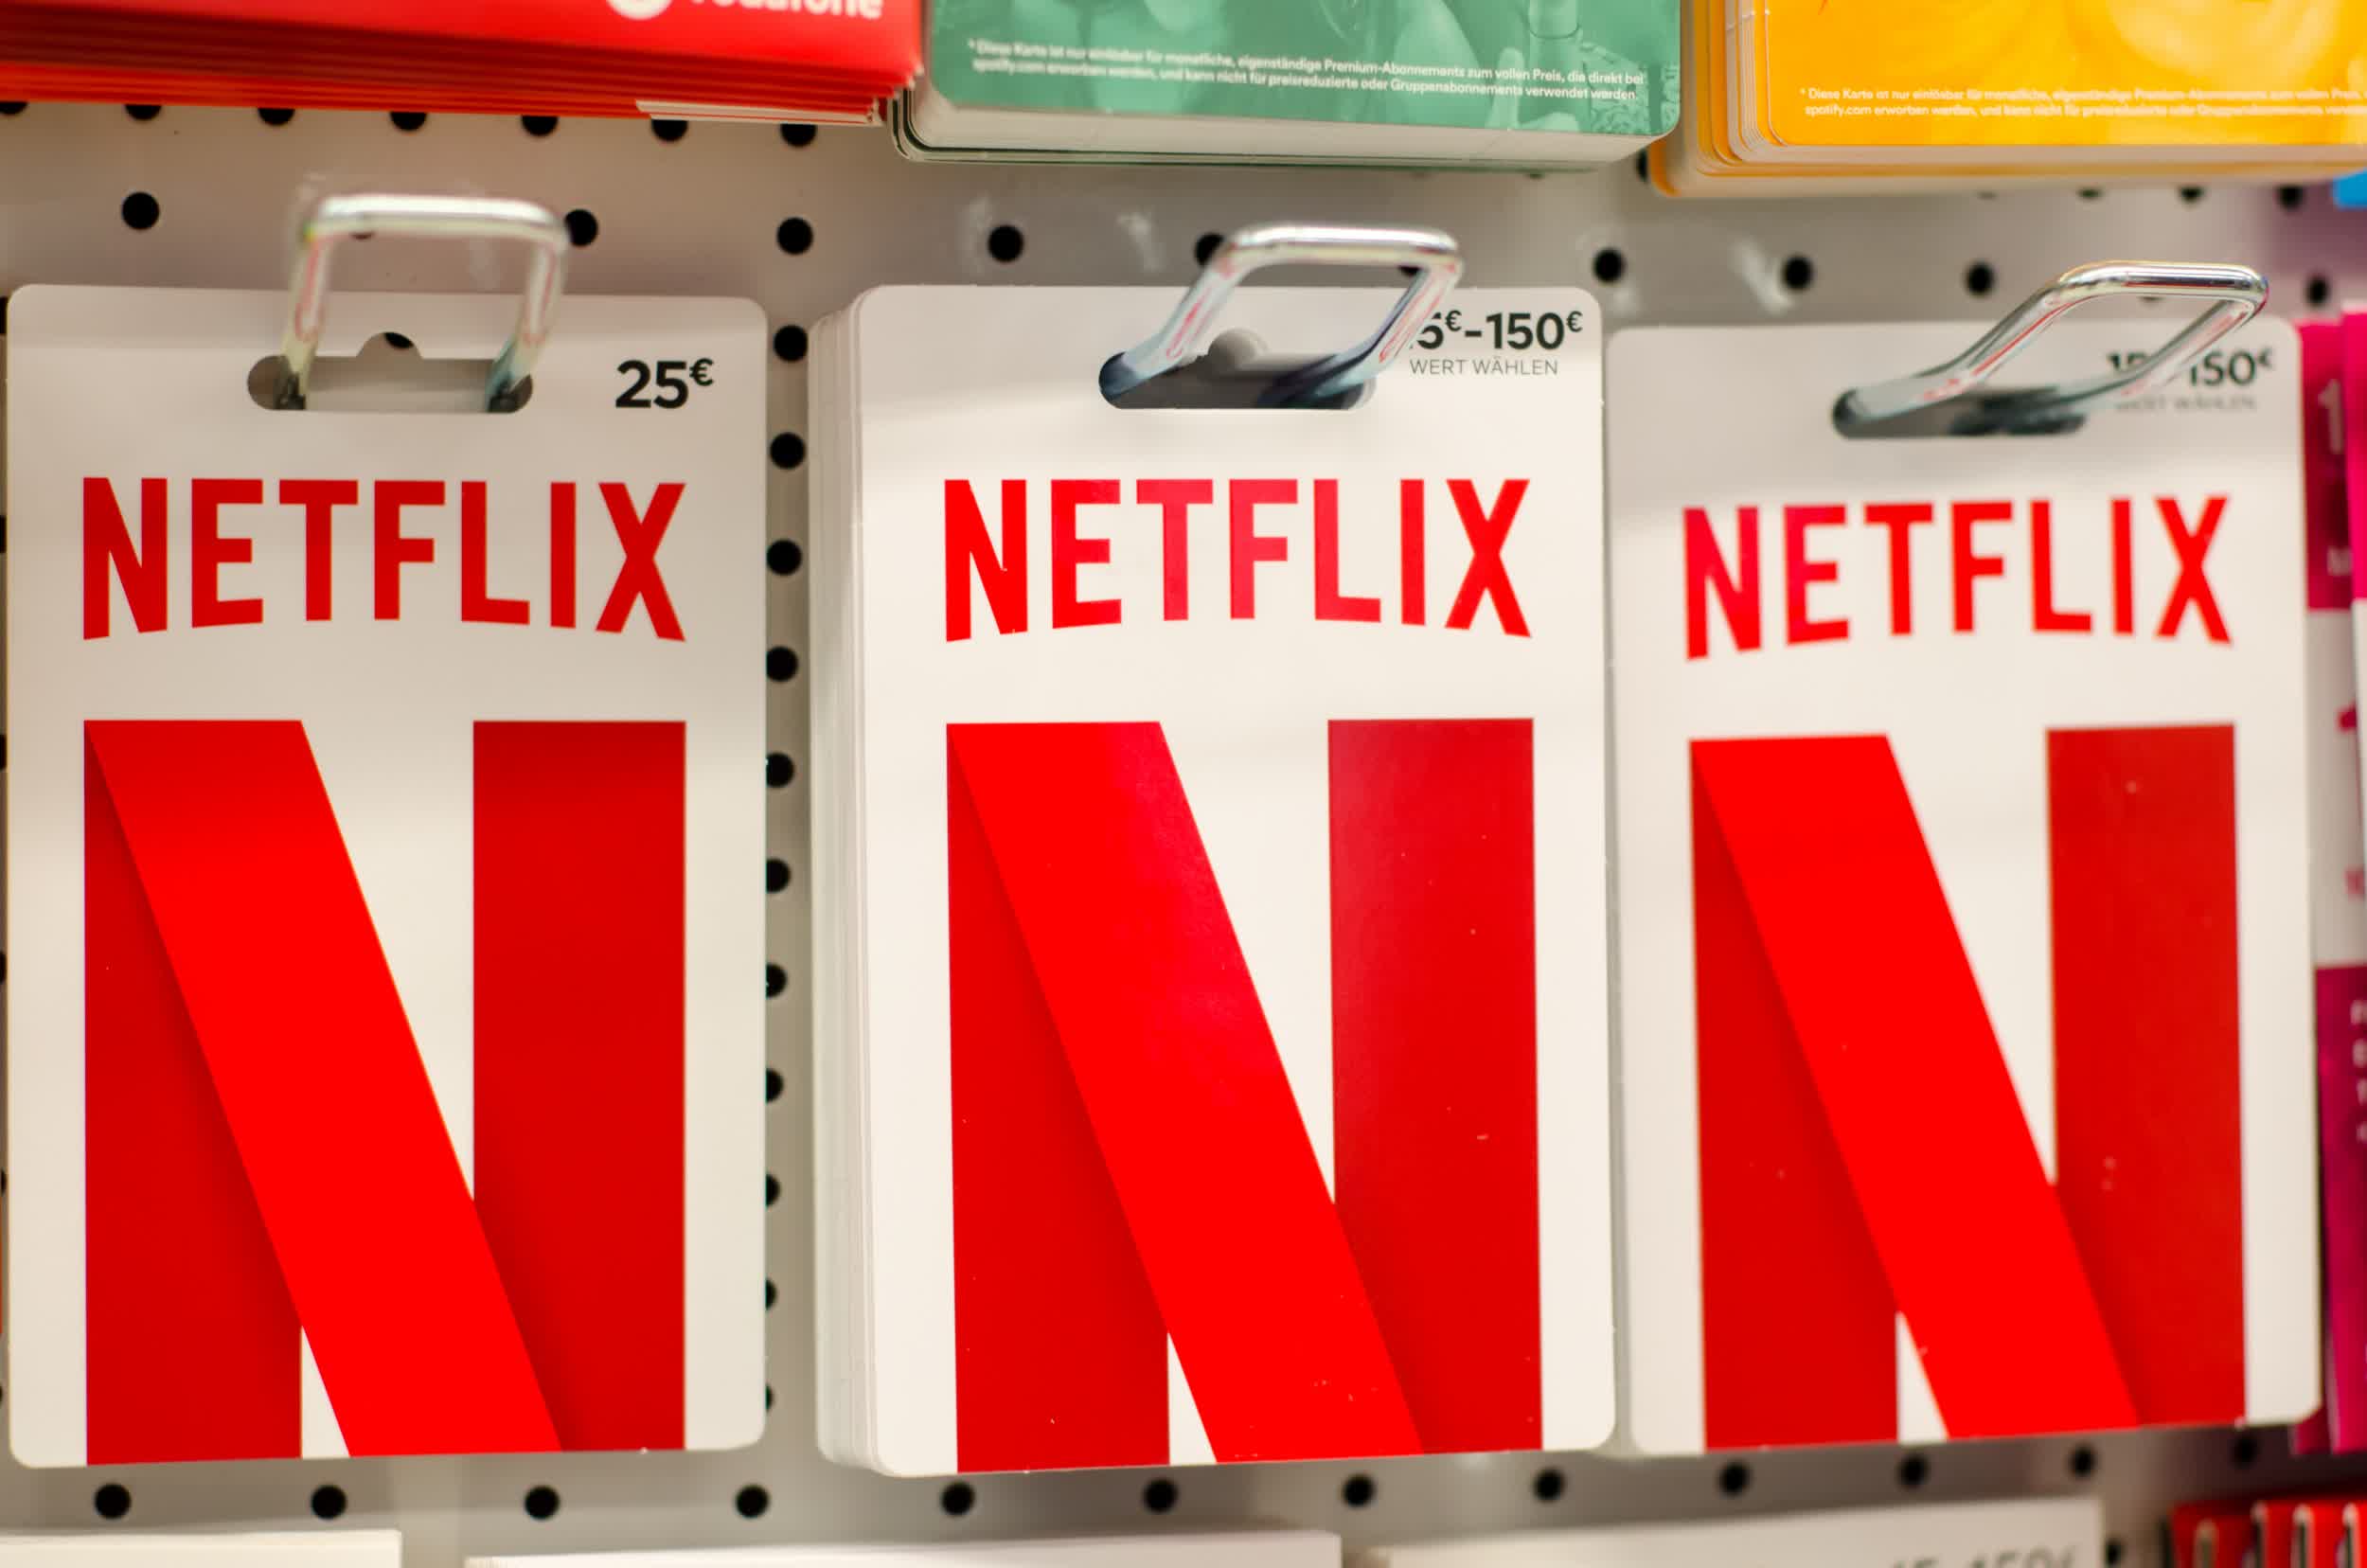 Netflix price hikes in the US: $1 more for standard, premium tier is going up $2